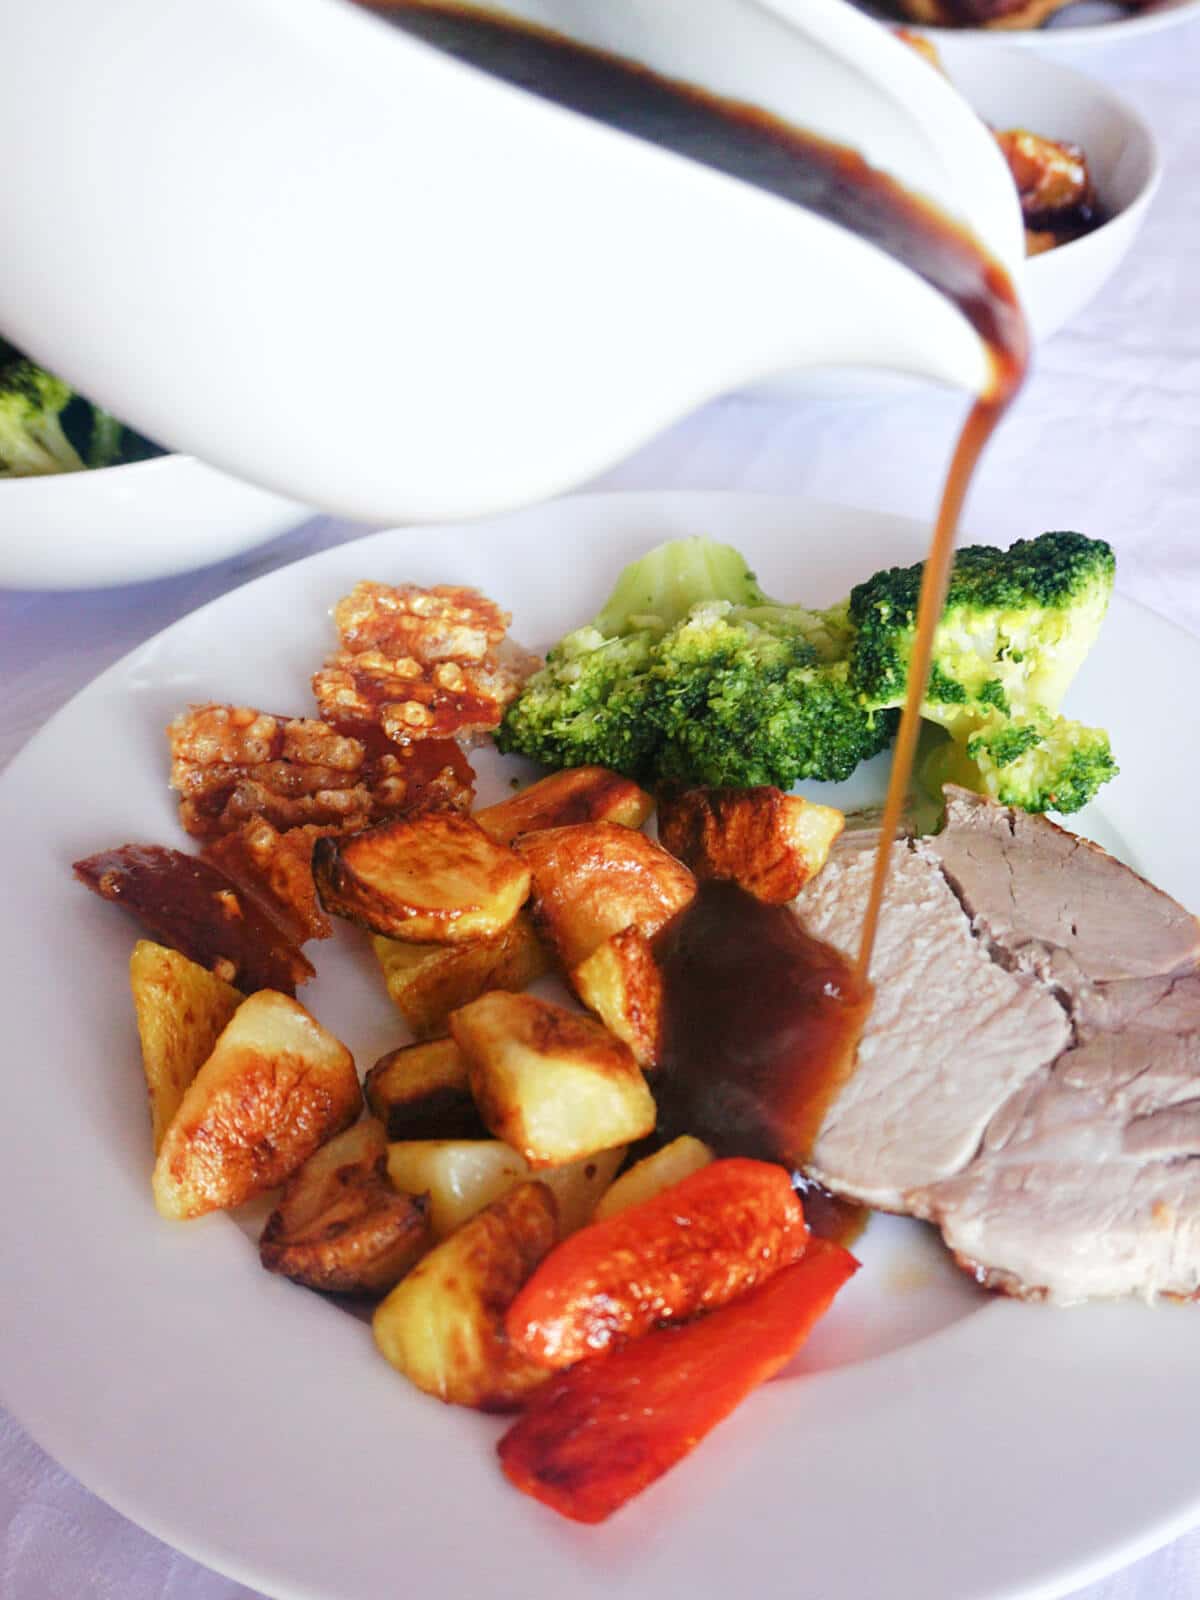 Gravy being poured over a slice of roast pork with vegetables on a white plate.